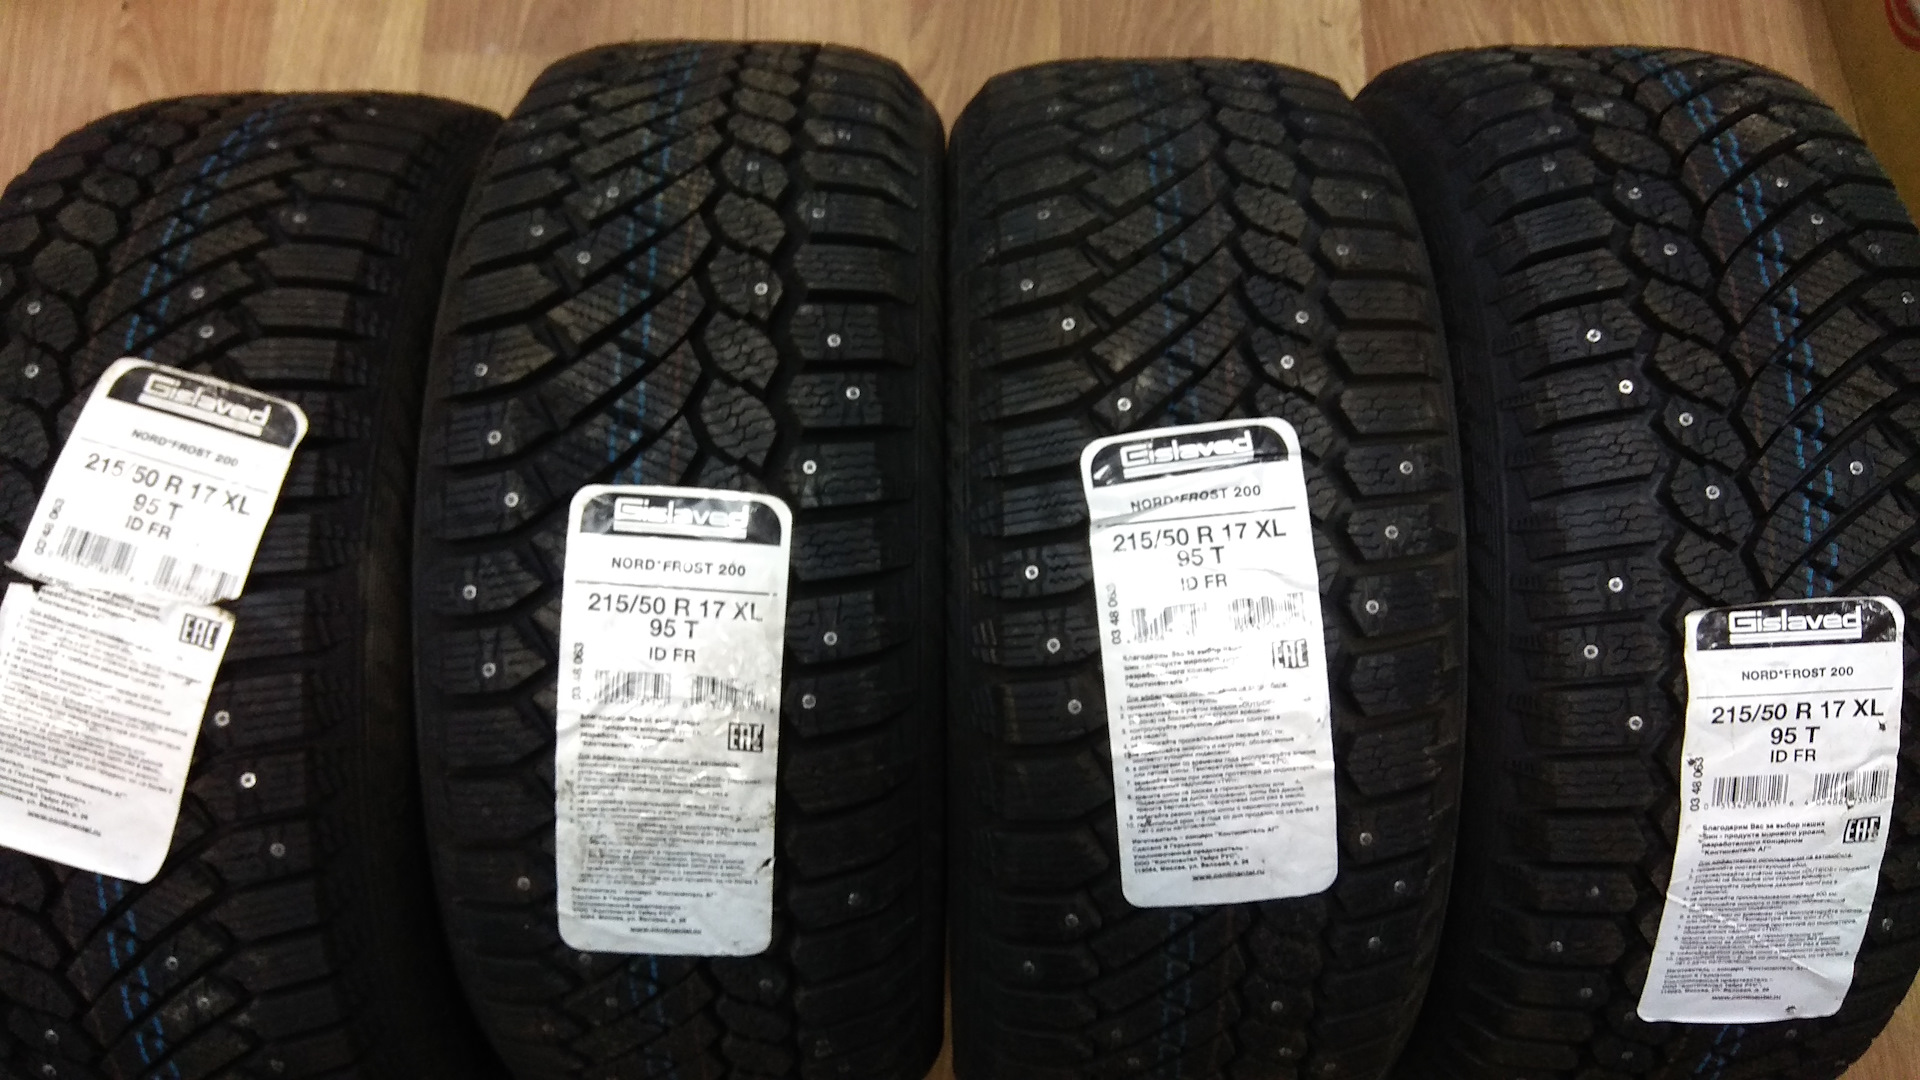 Gislaved frost 200 купить. Gislaved Nord Frost 200. Gislaved Nord Frost 200 зимняя шипованная. Gislaved Nord Frost 200 215/50 r17. Шины Gislaved 215/50r17 Nord Frost 200 95t шип.